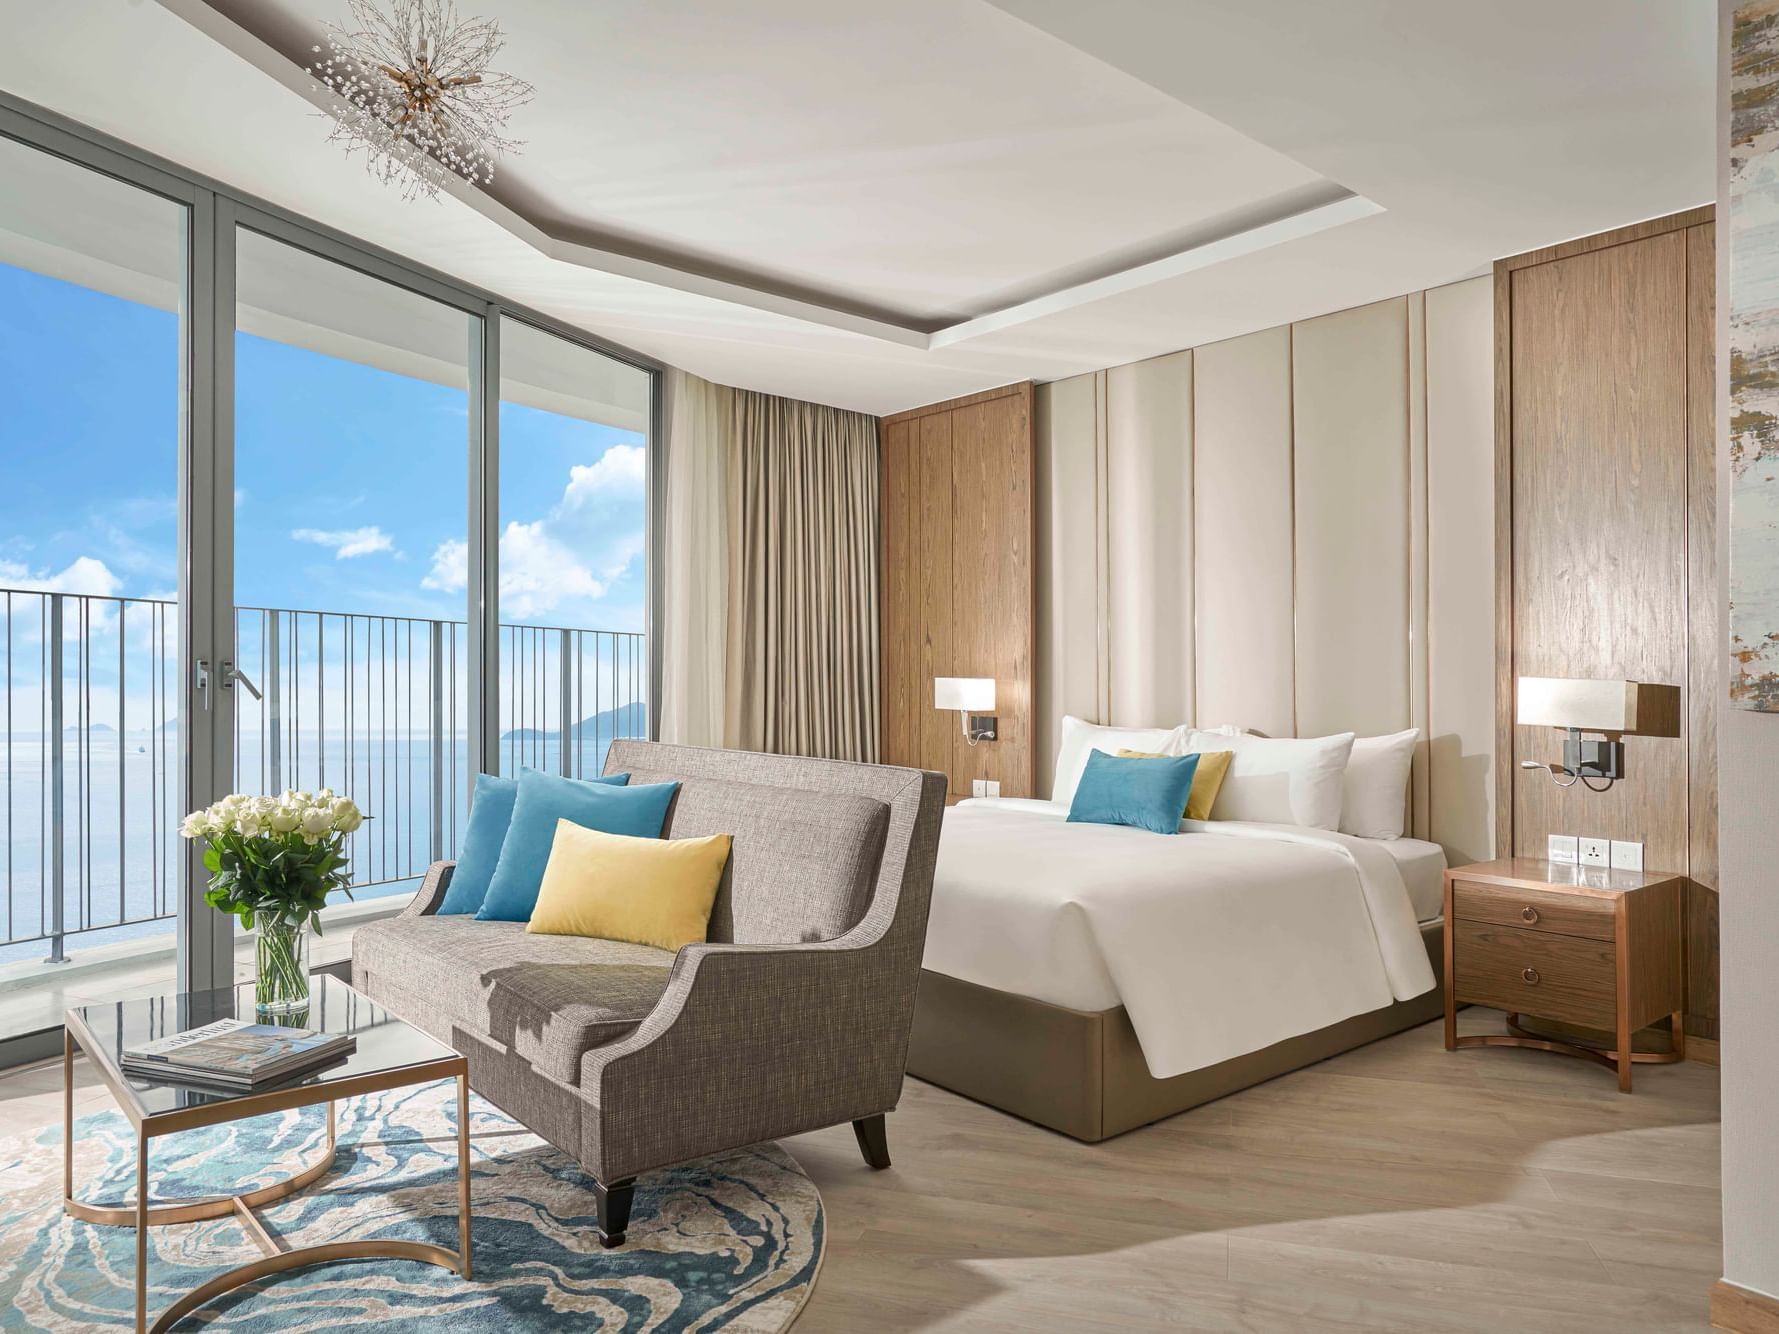 Interior of The Executive Ocean View at Eastin Hotels